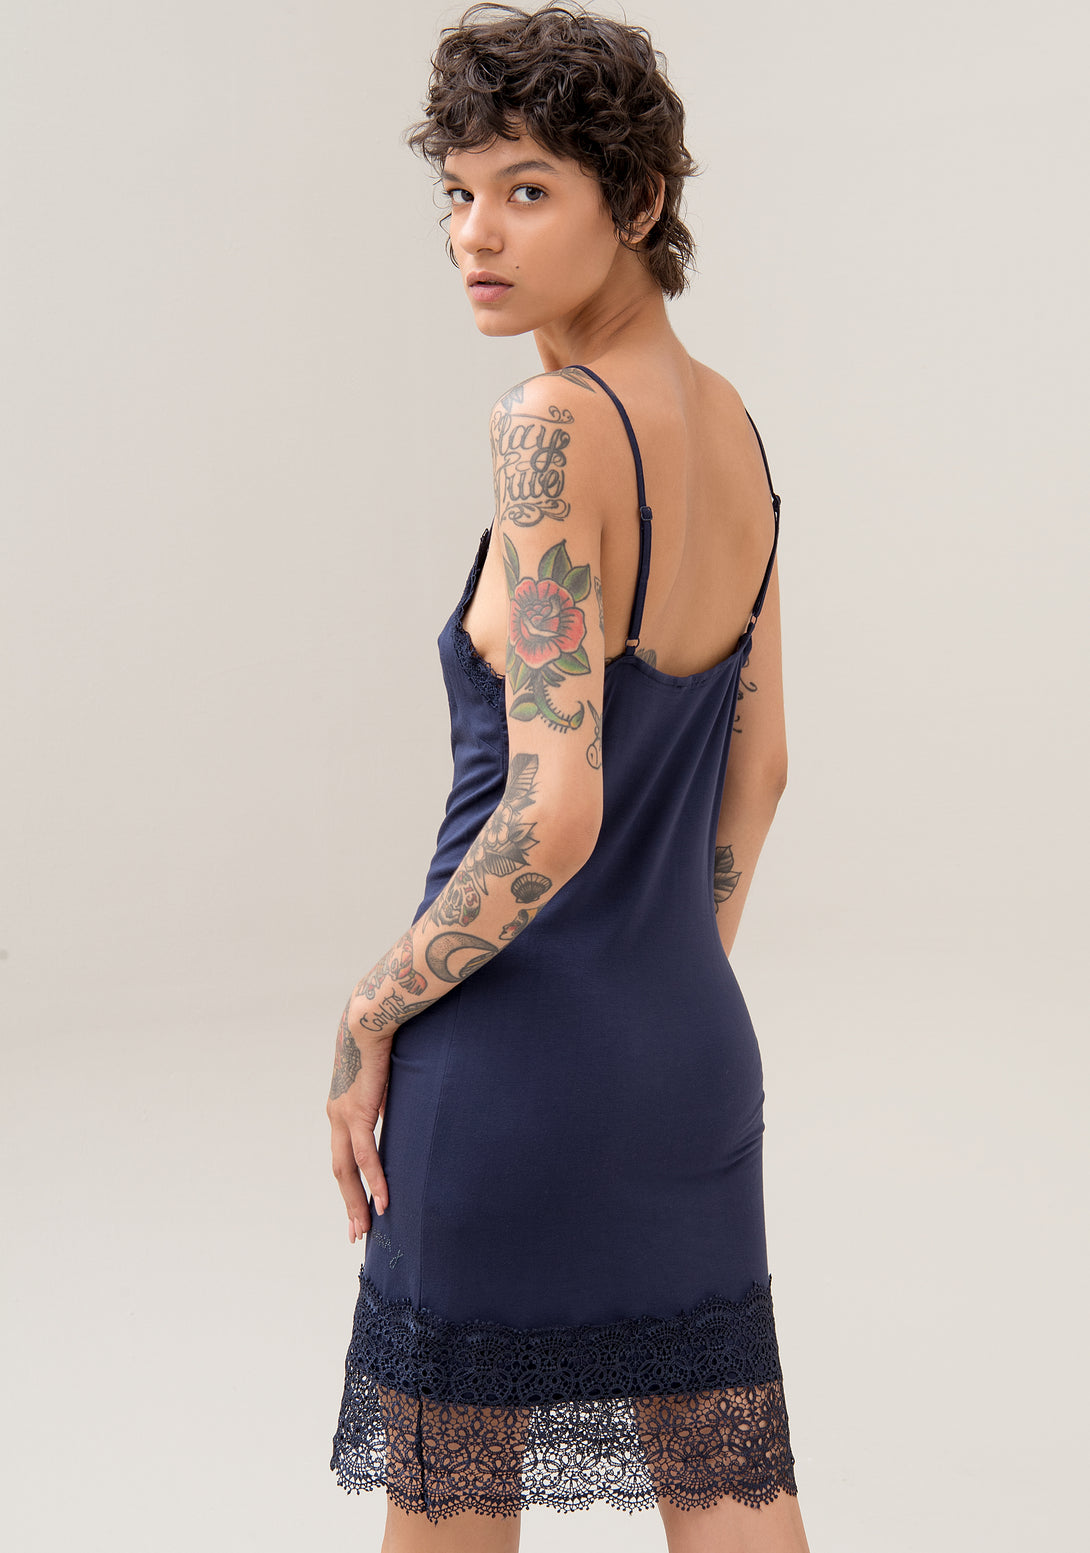 Slip dress regular and tight fit with lace details